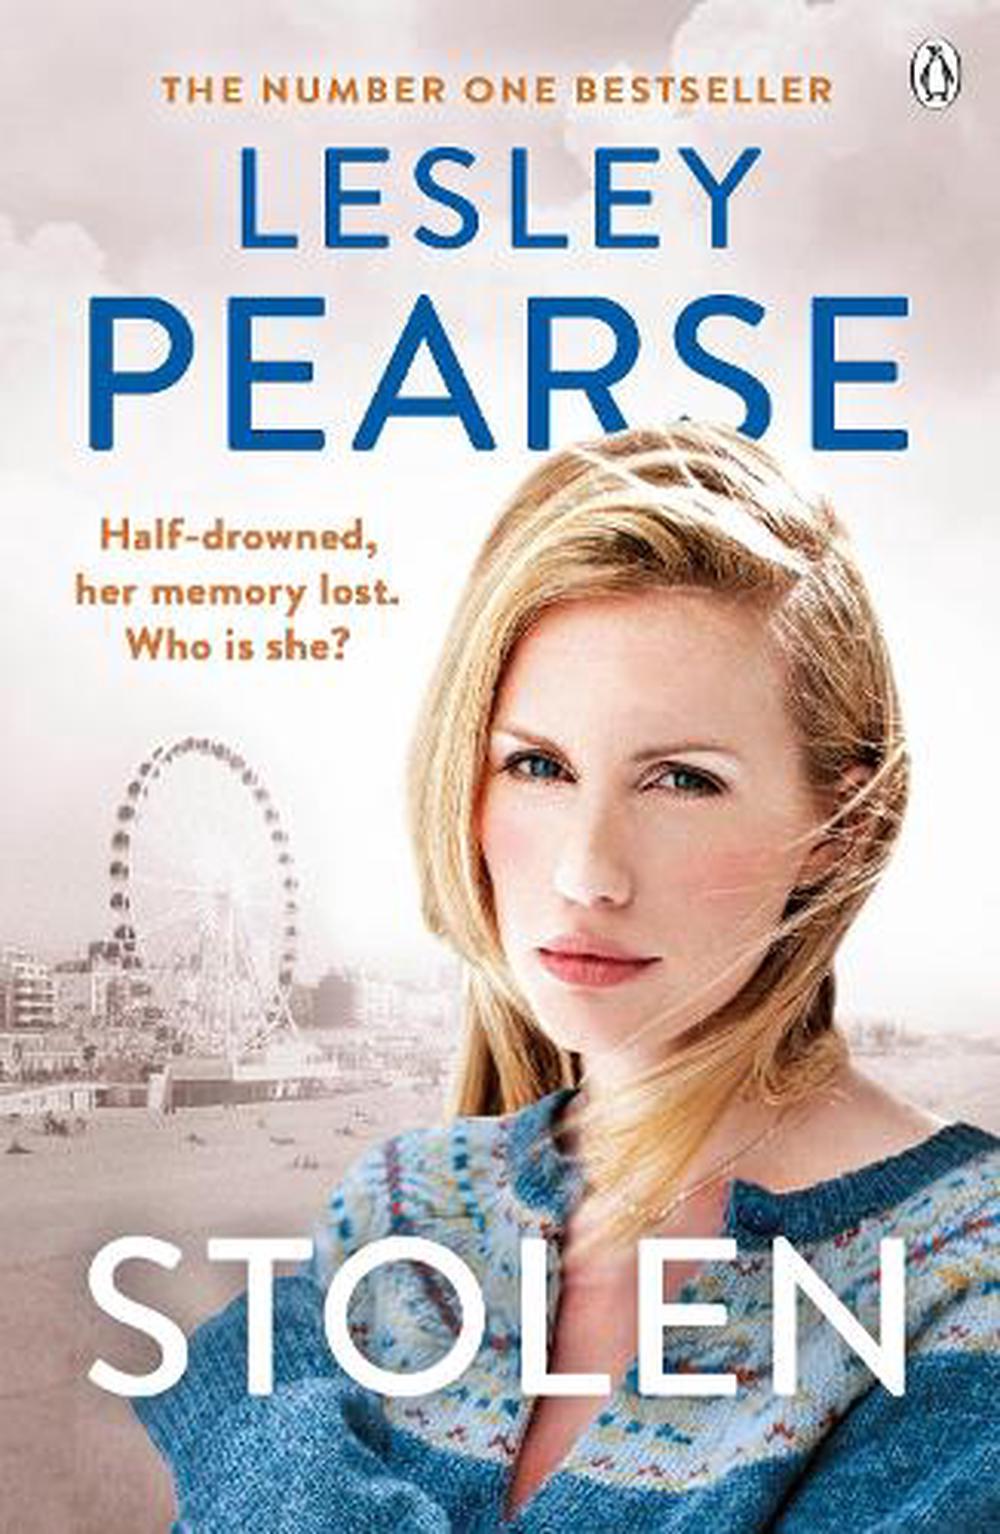 by　The　Lesley　at　9780141030500　online　Buy　Paperback,　Pearse,　Stolen　Nile